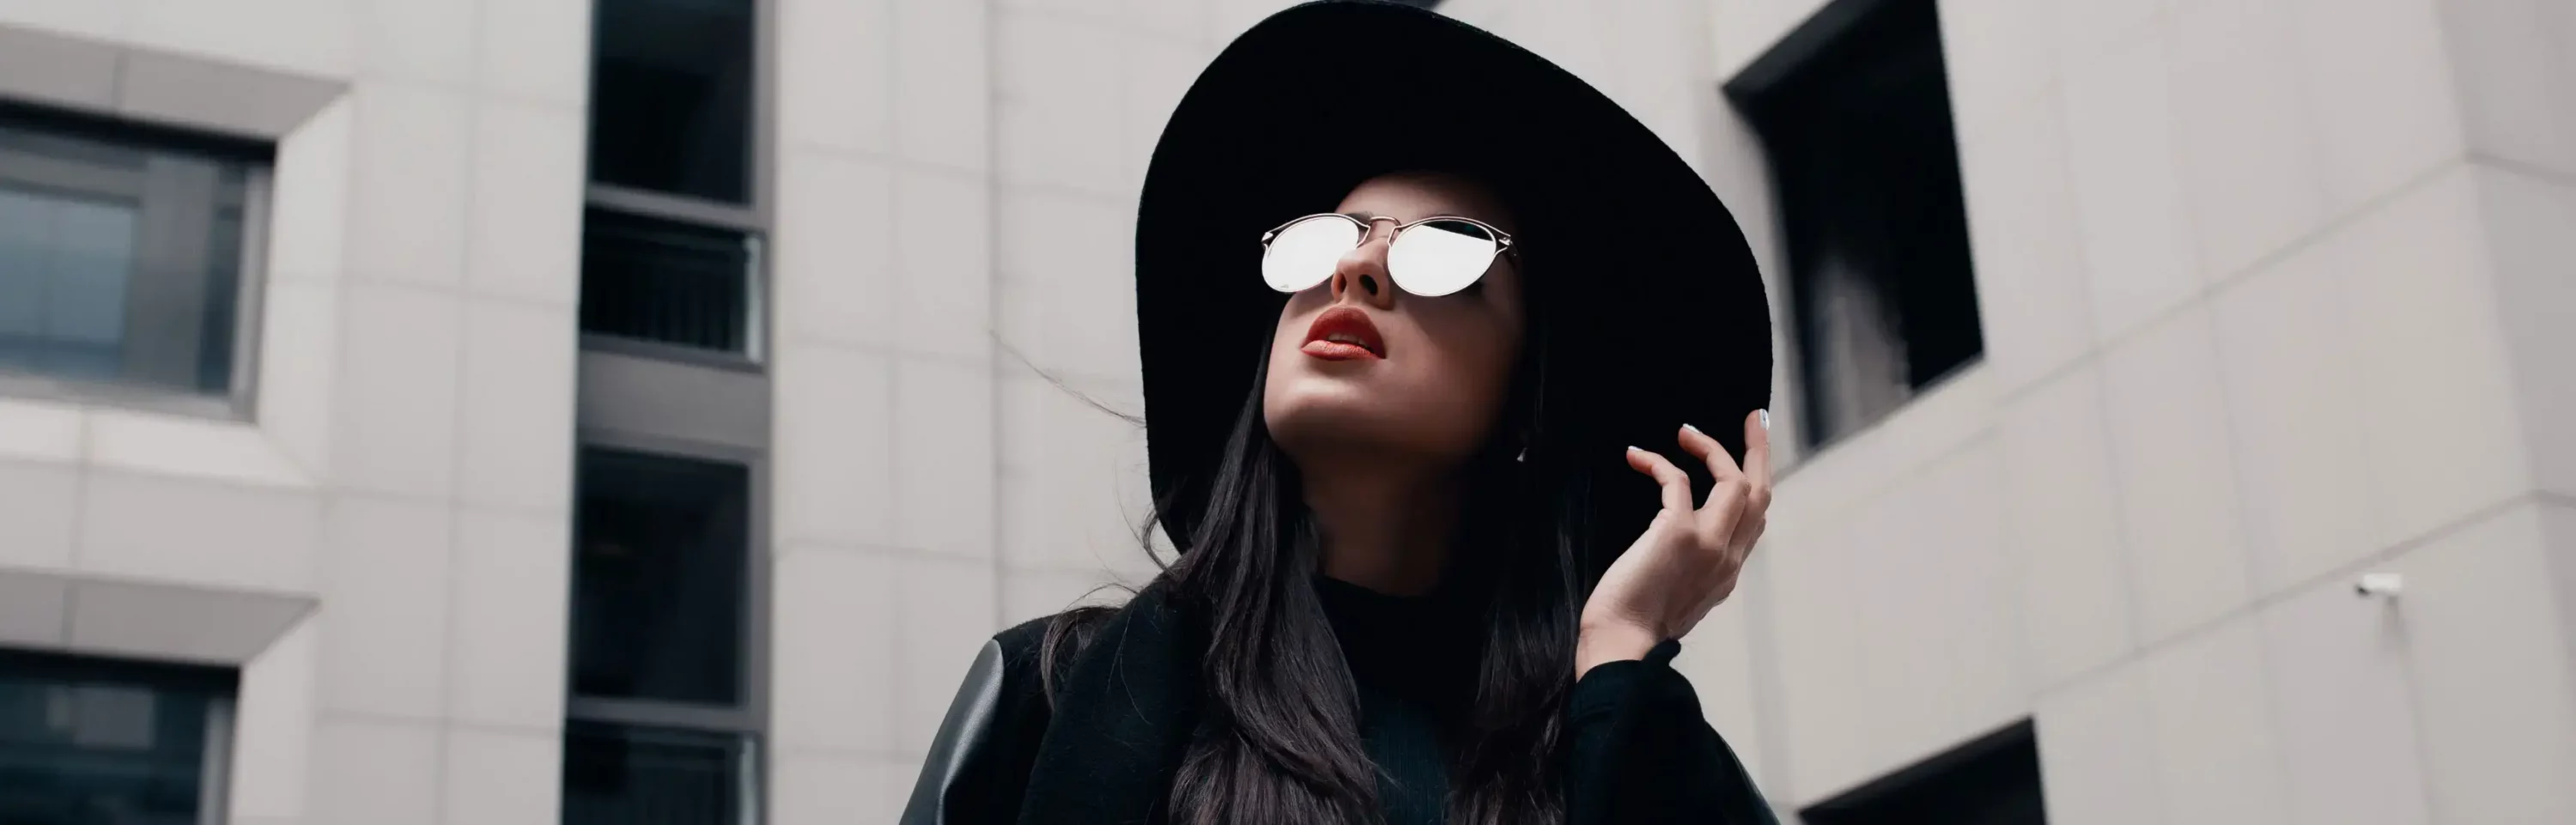 A person wearing a black hat and mirrored sunglasses looks up while standing in an urban area with modern buildings in the background, showcasing a sleek, redesigned look for YourFit 2024.